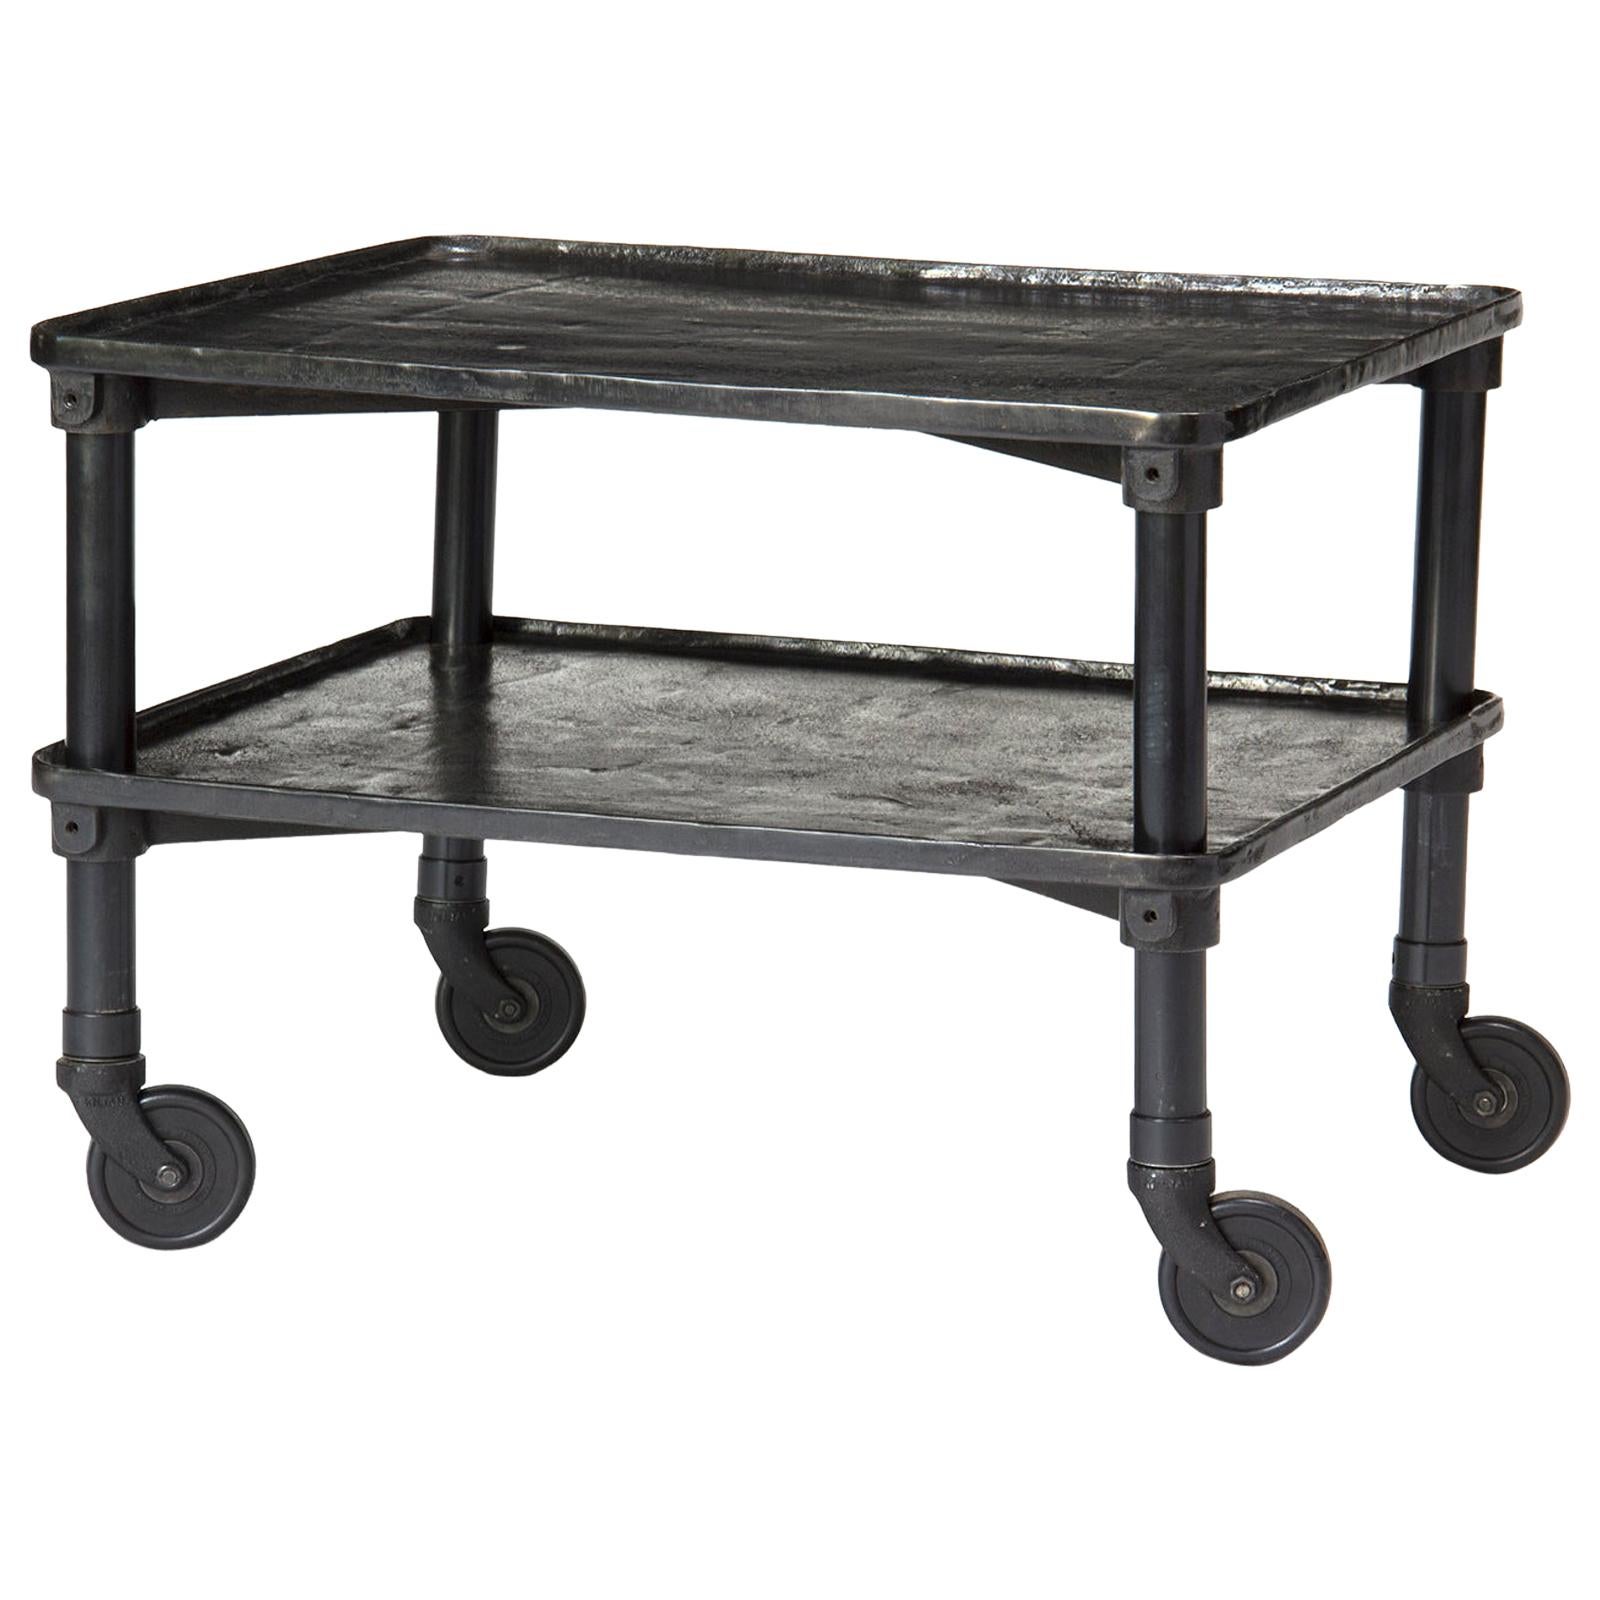 1920s Industrial Rolling Table by New Britain Machine Co.